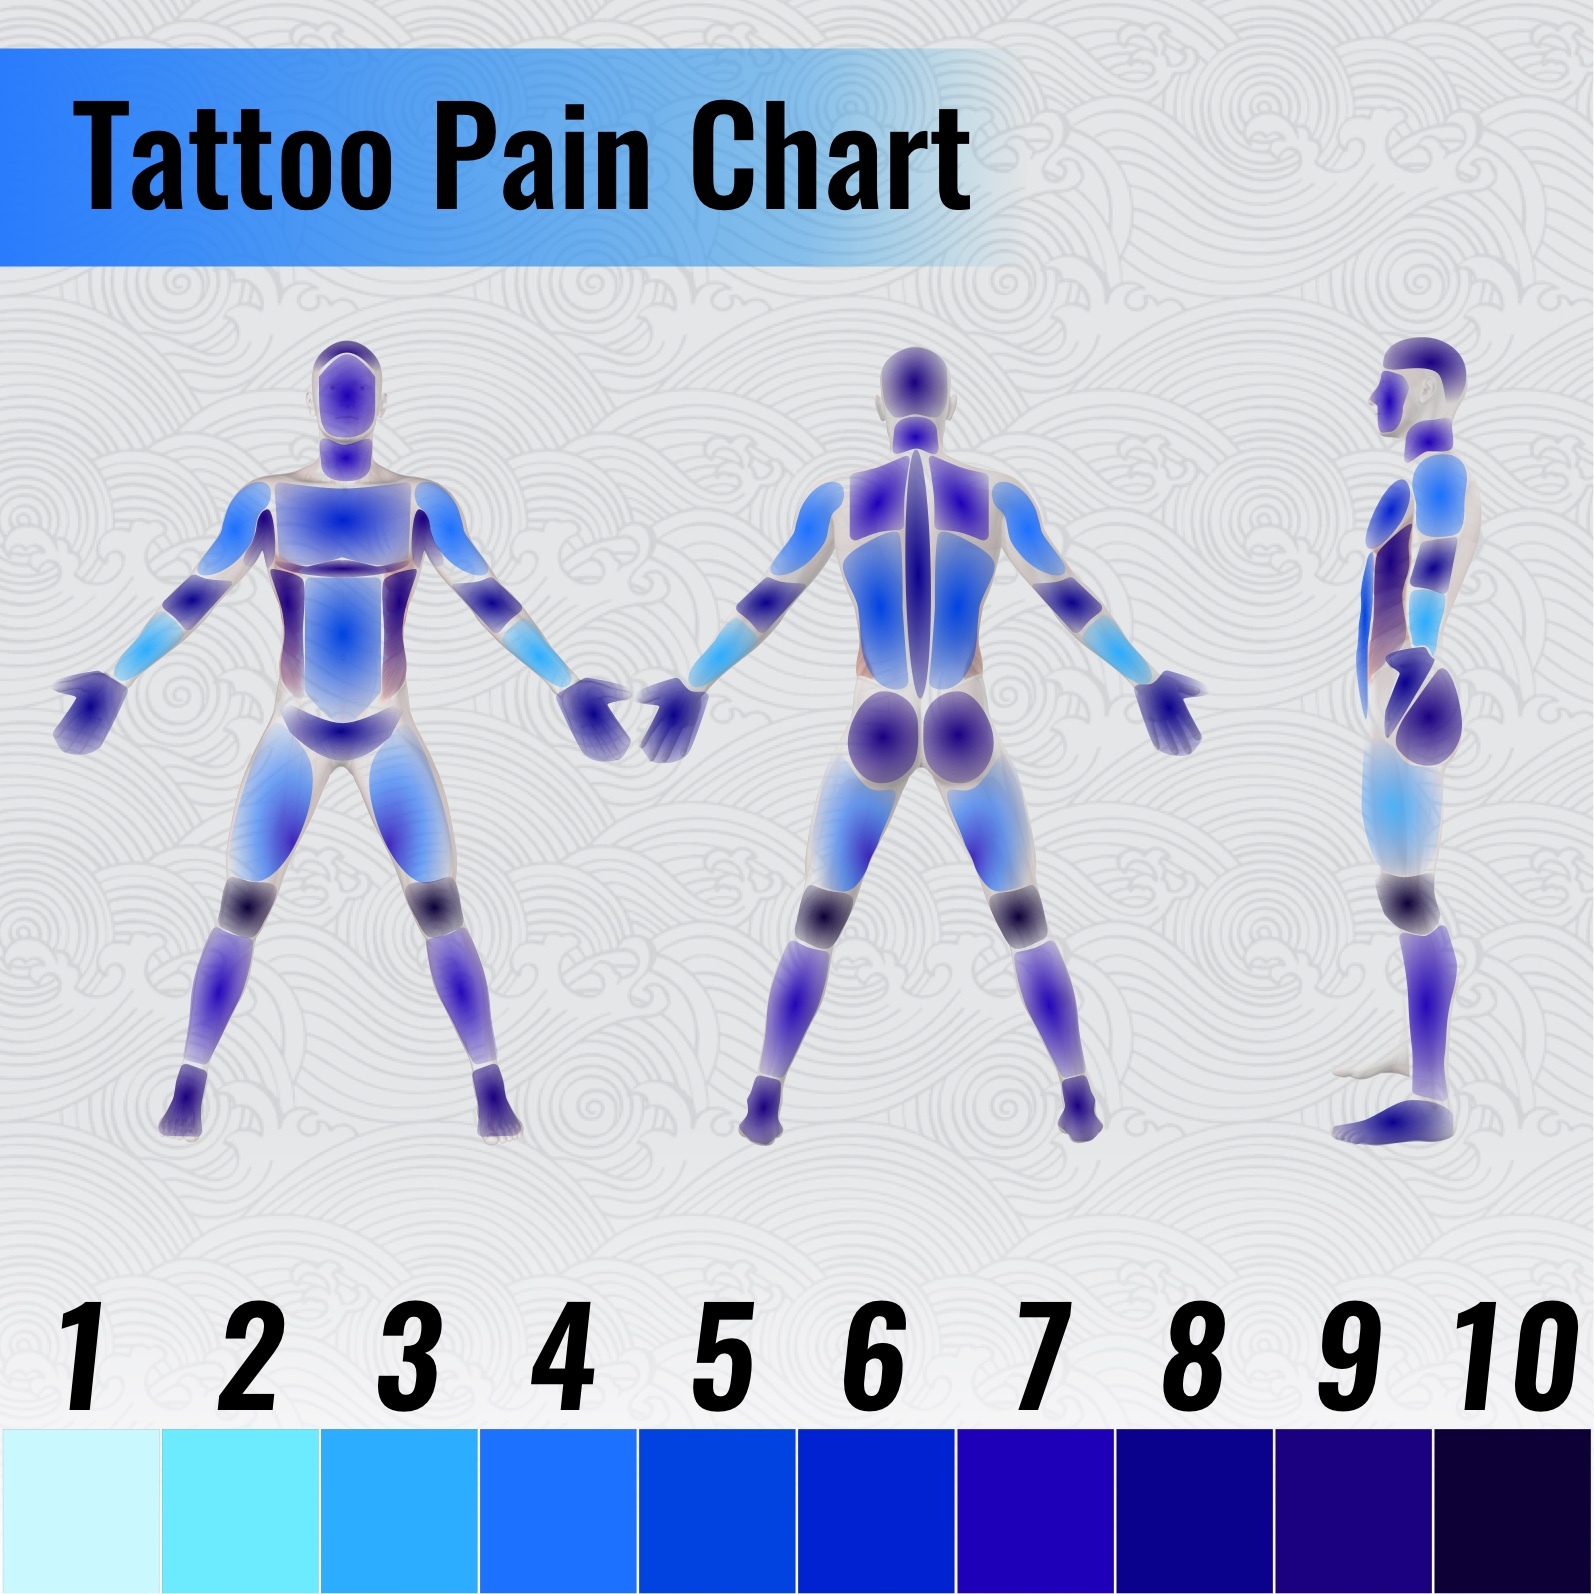 How Much does a Tattoo Hurt?